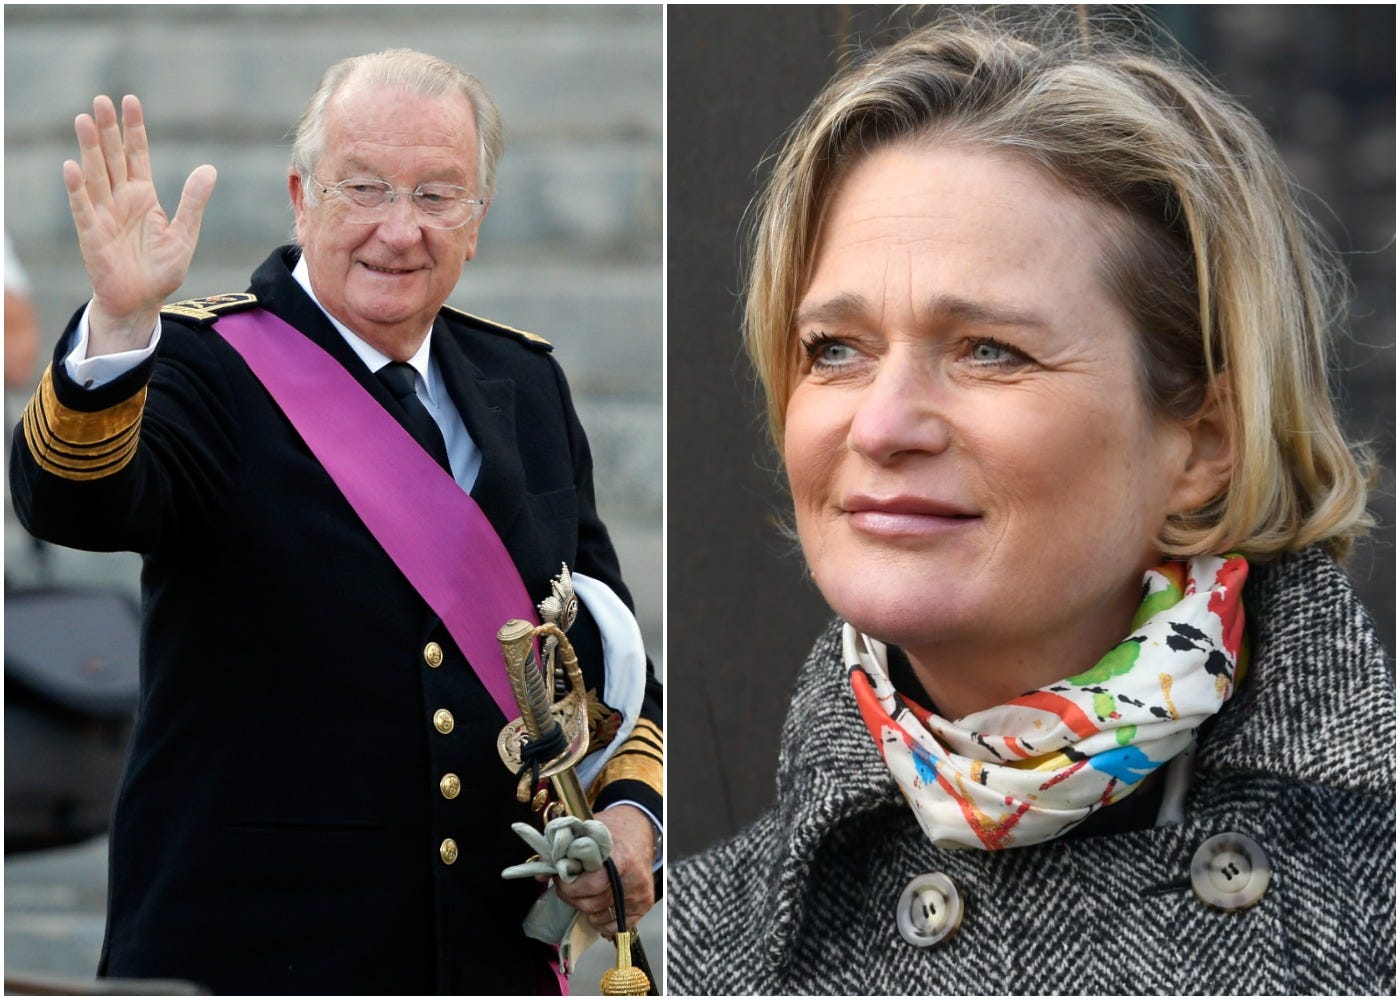 King Albert II of Belgium in front of the Cathedral of St Michael and Saint Gudula, and Delphine van Saxen-Coburg, and the first time Delphine goes public as a princess.